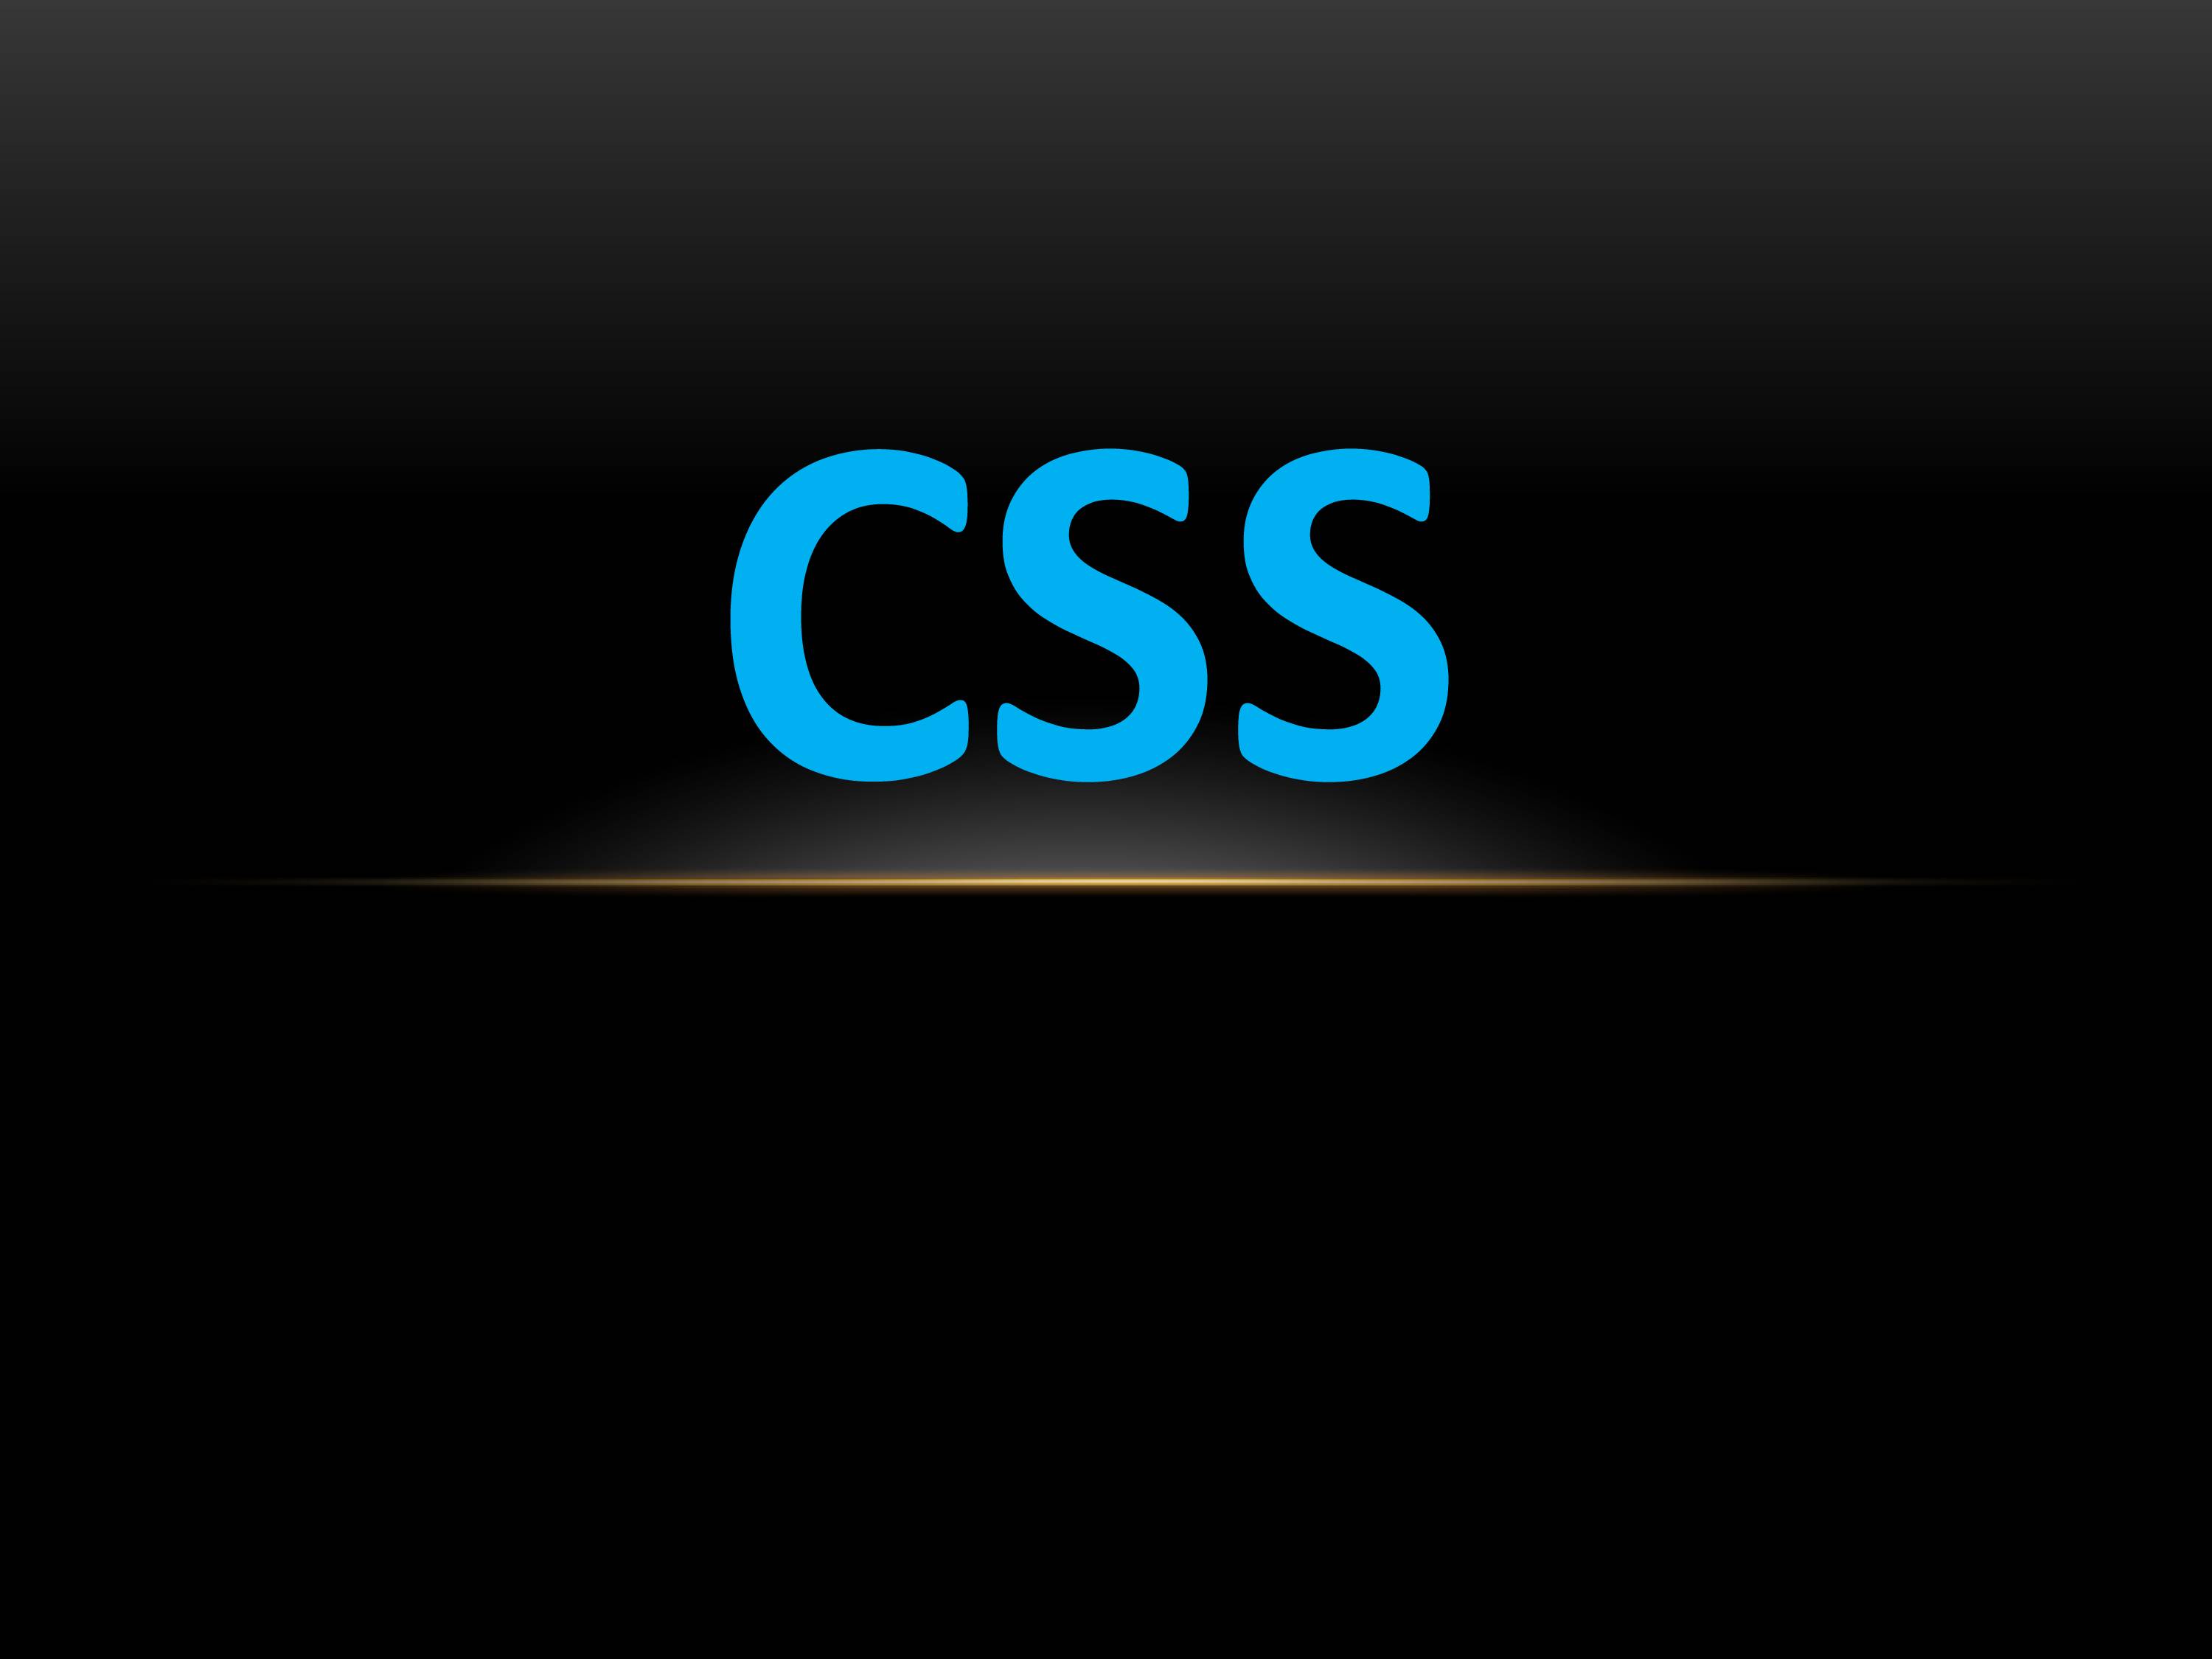 Presentation on Introduction to CSS